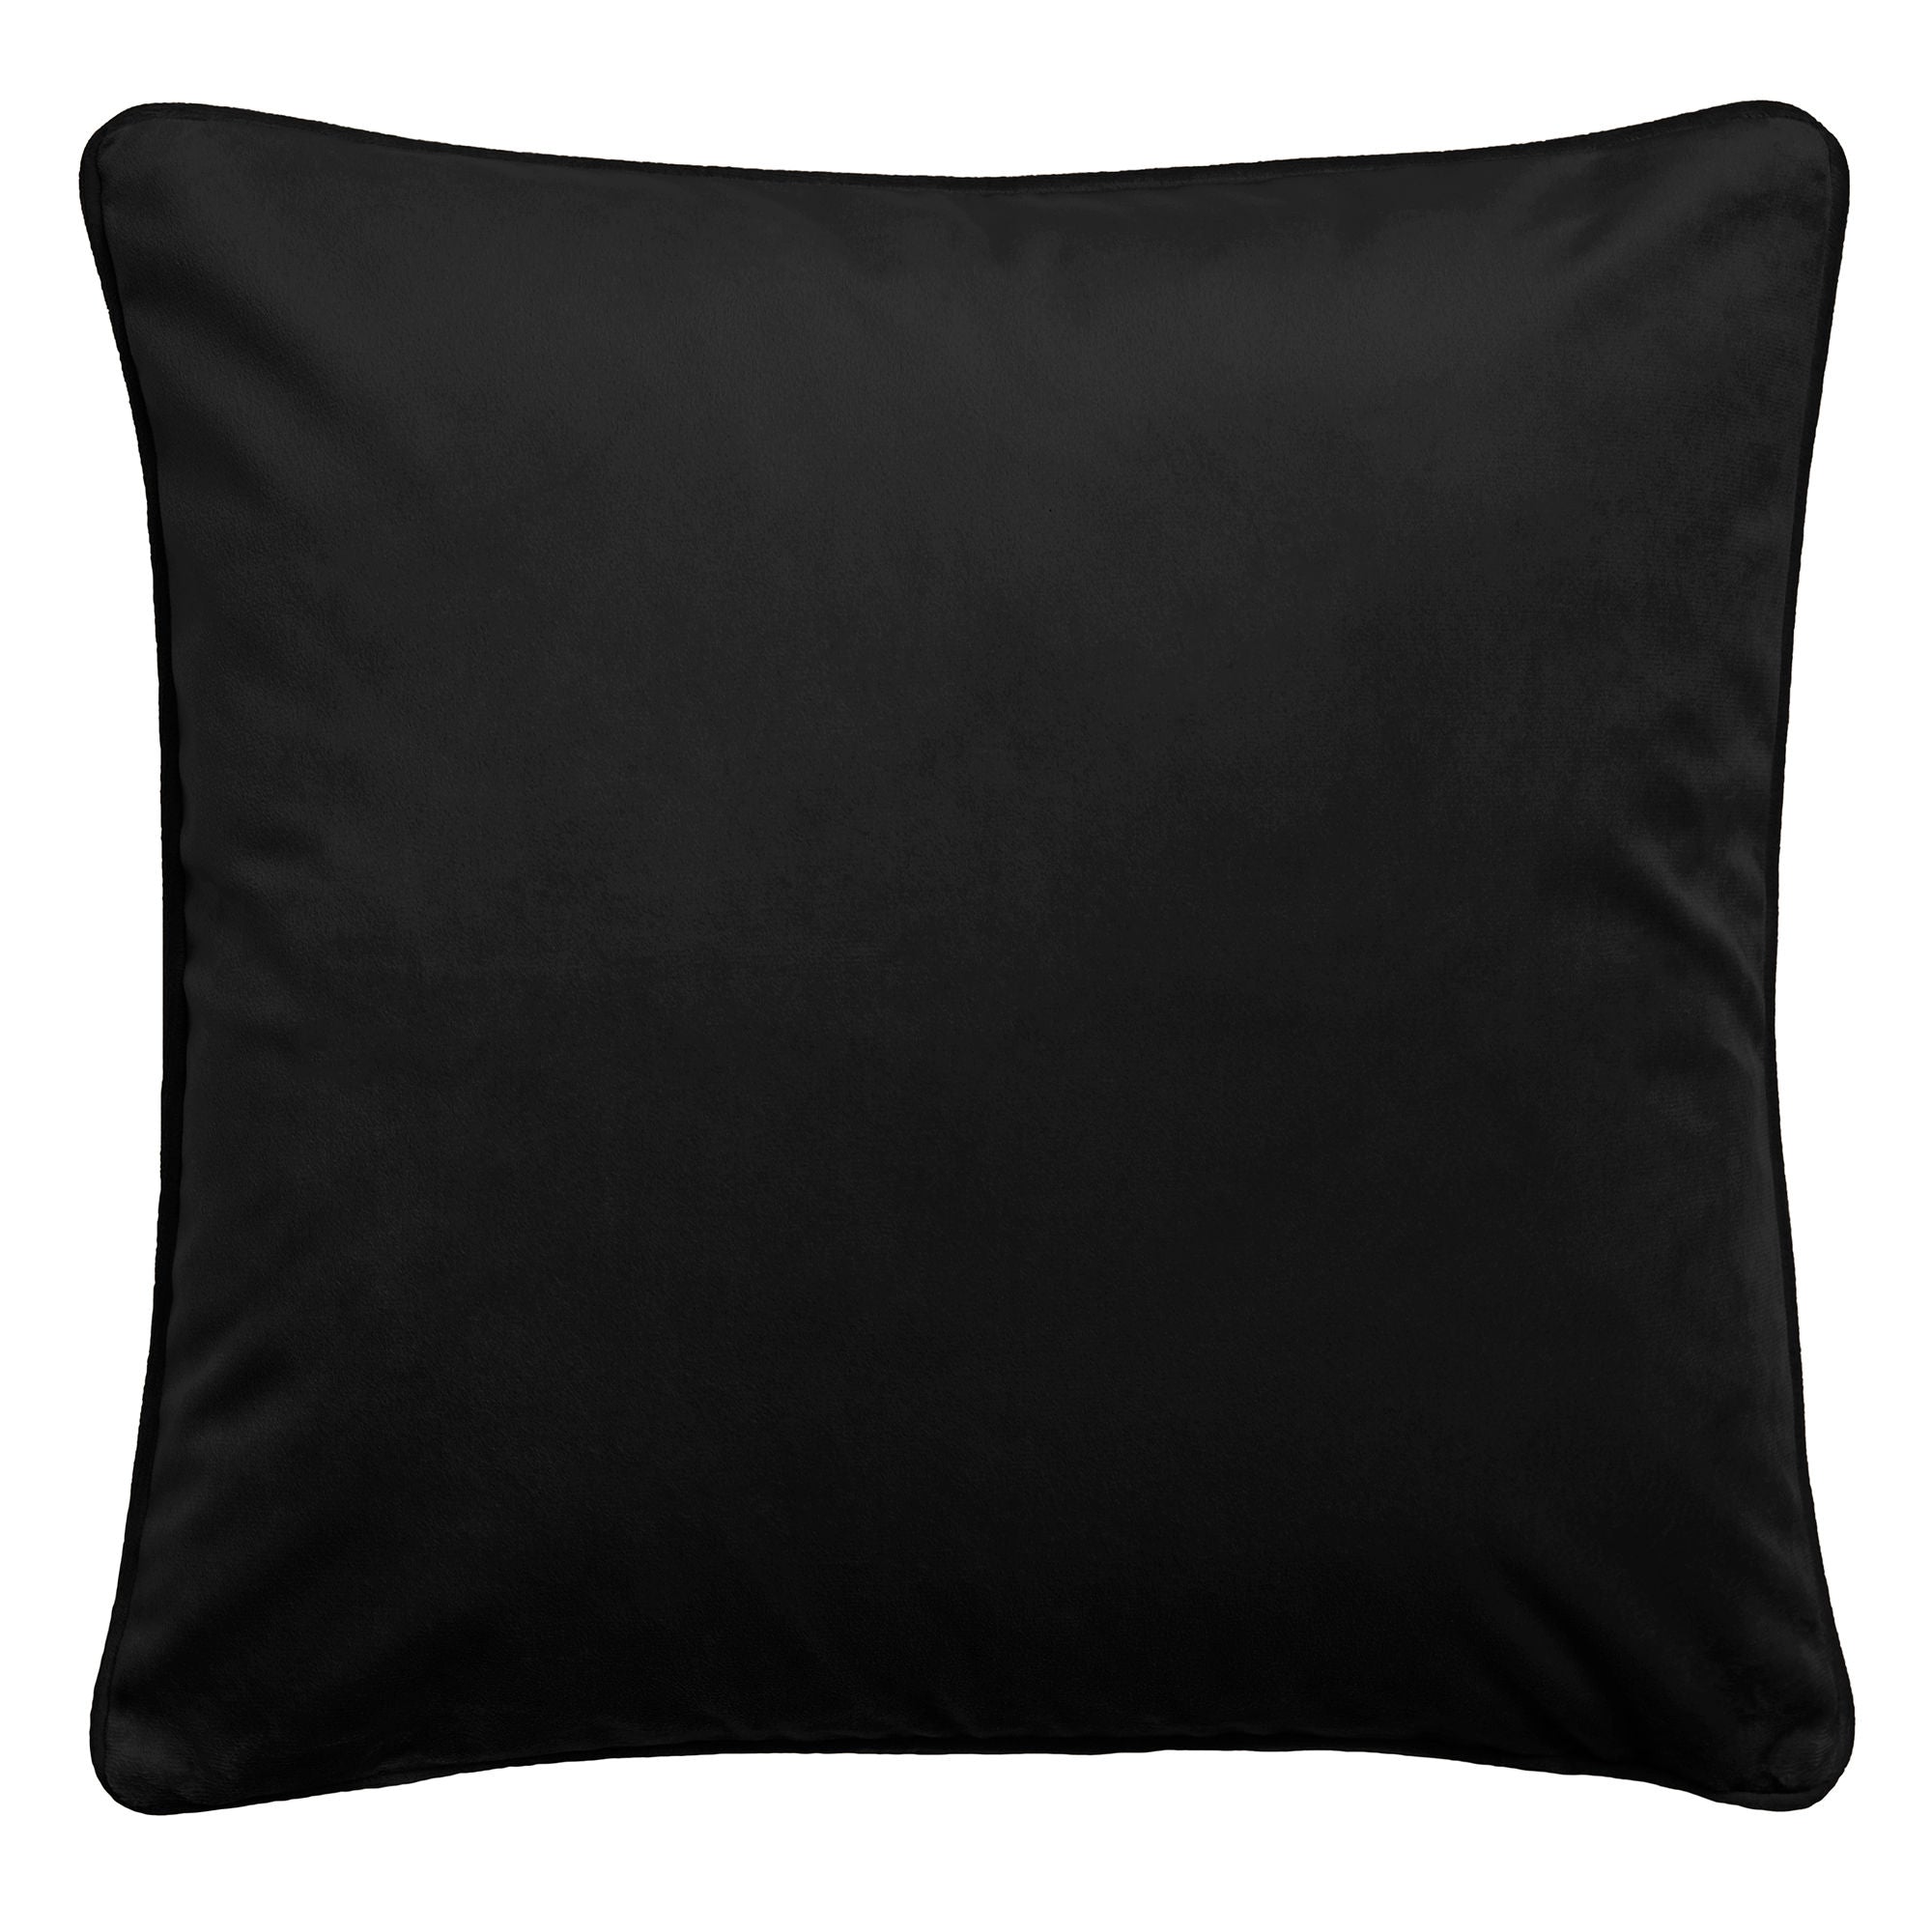 Montrose Cushion by Laurence Llewelyn-Bowen in Black 43 x 43cm - Cushion - Laurence Llewelyn-Bowen